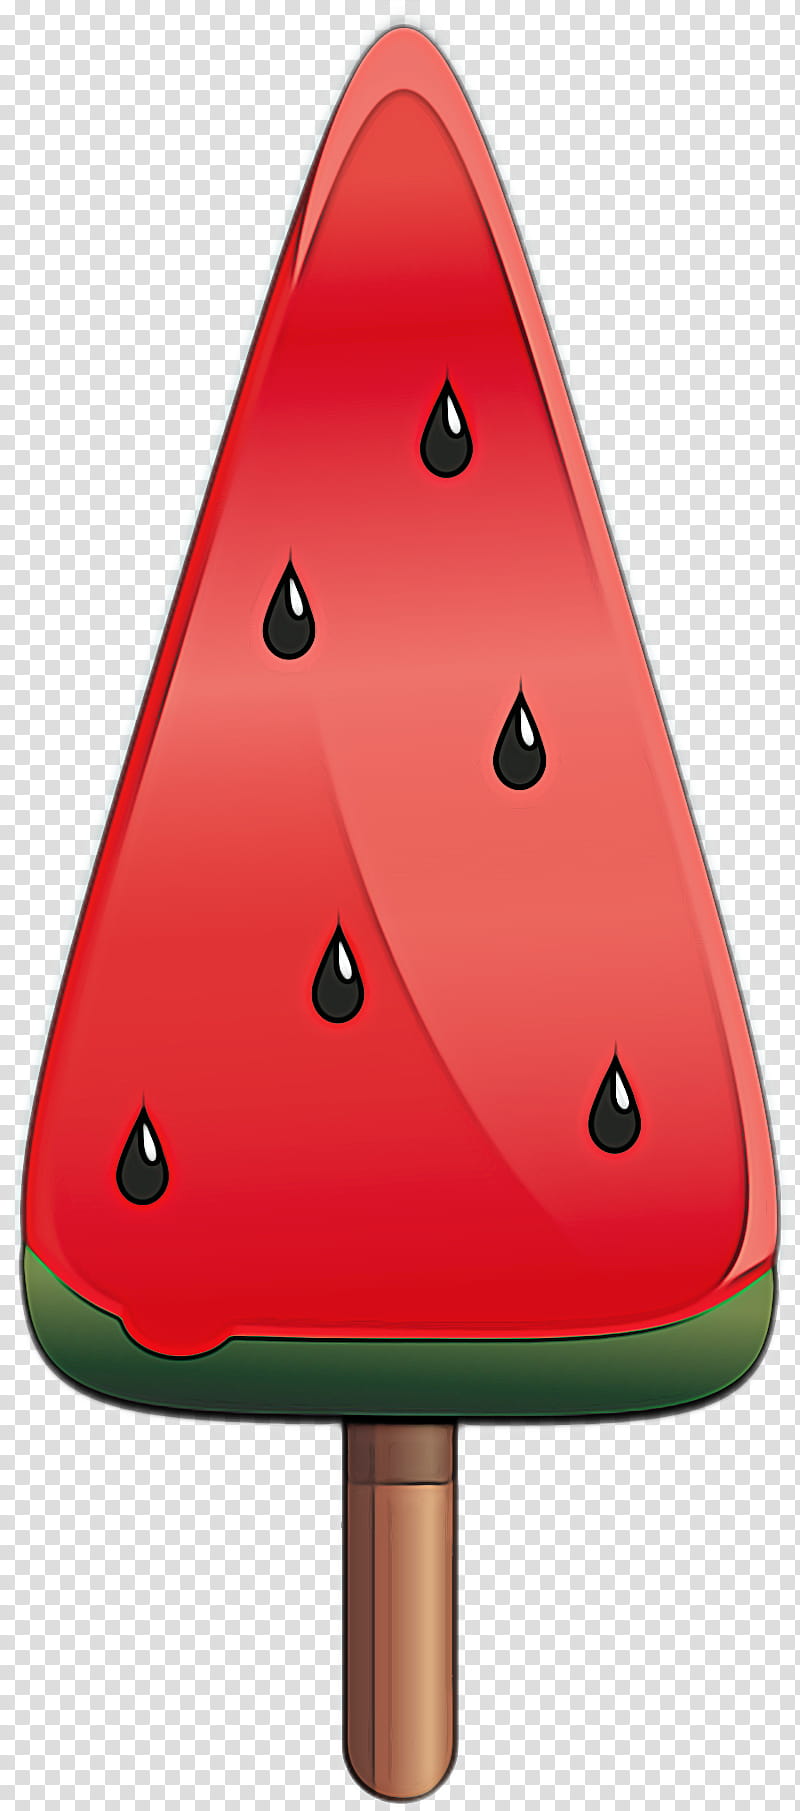 Watermelon, Triangle, Sign, Climbing Hold, Signage transparent background PNG clipart